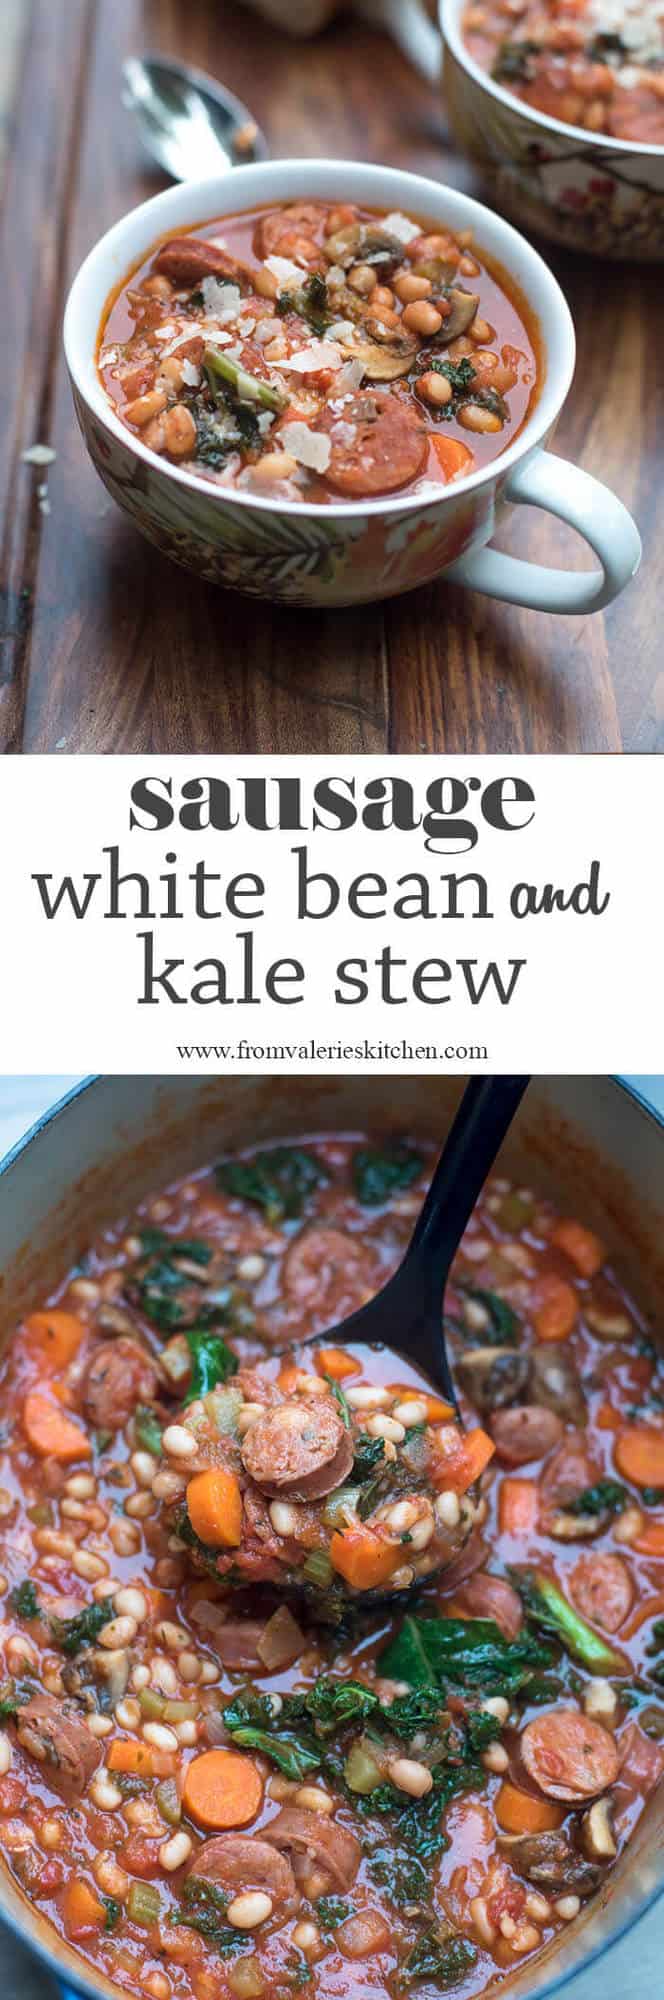 Two images of Sausage White Bean and Kale Stew with text overlay.